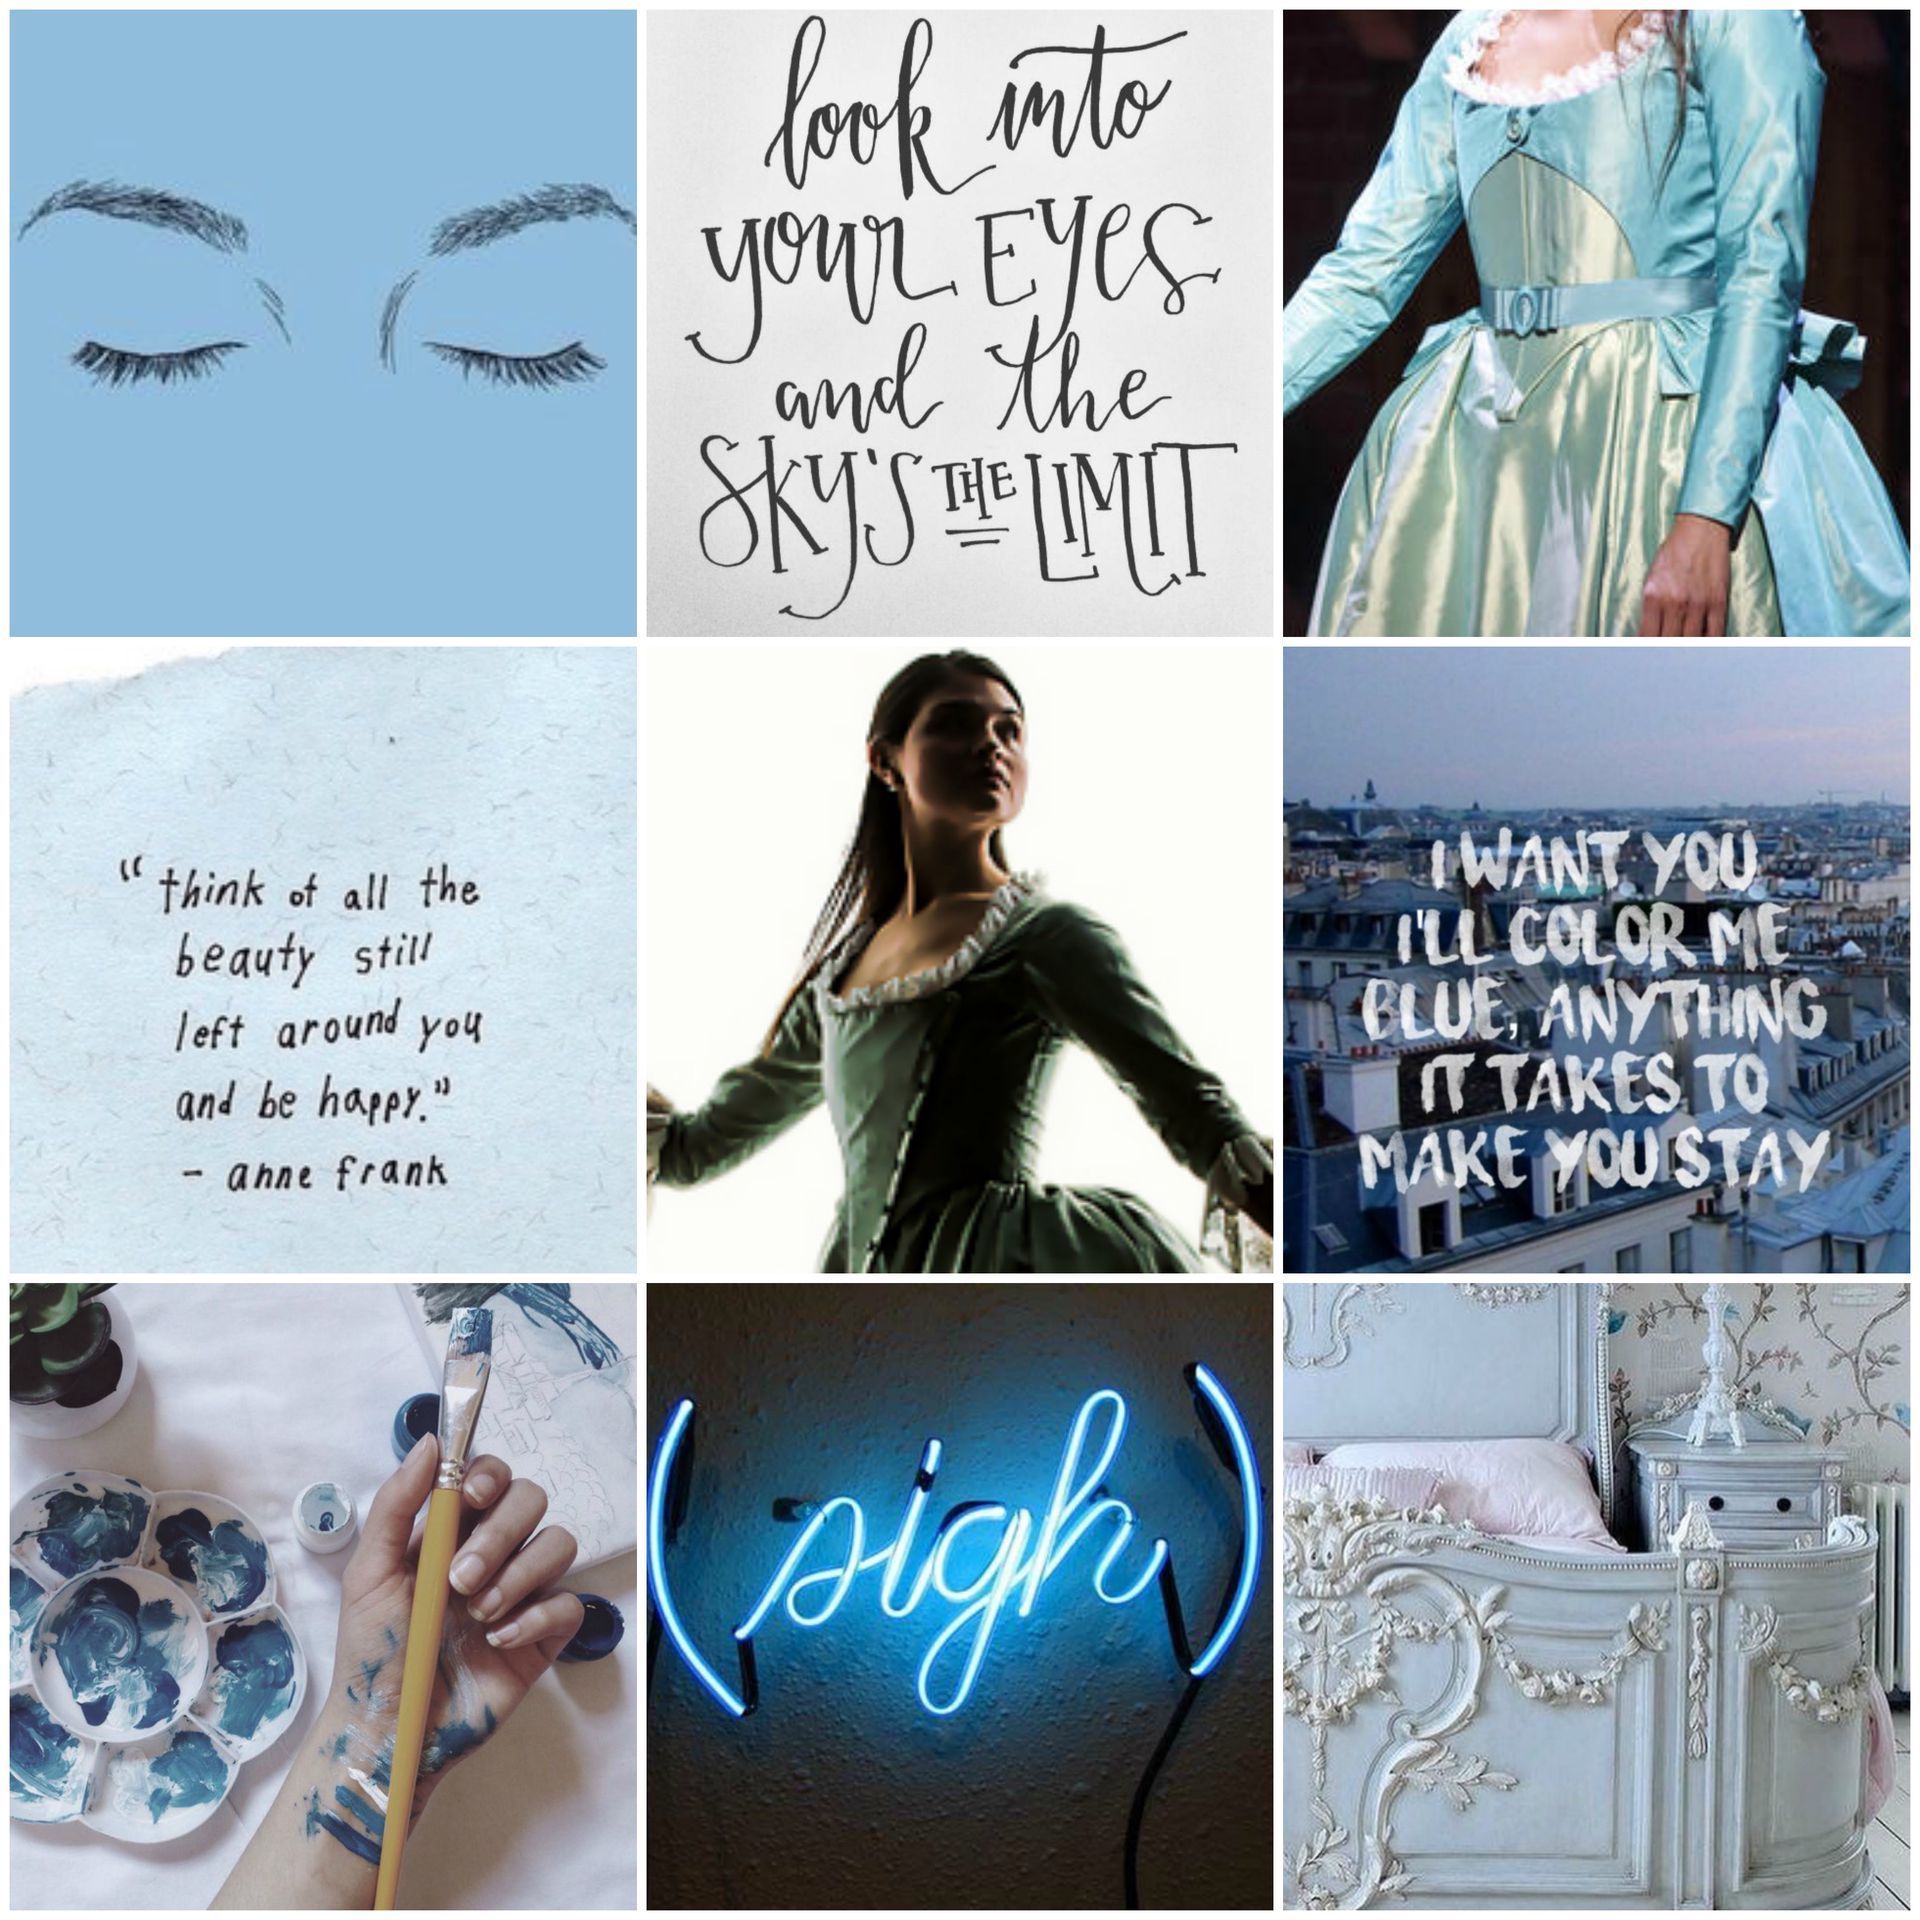 Collage of images including a dress, a quote, a city, and a neon sign - Broadway